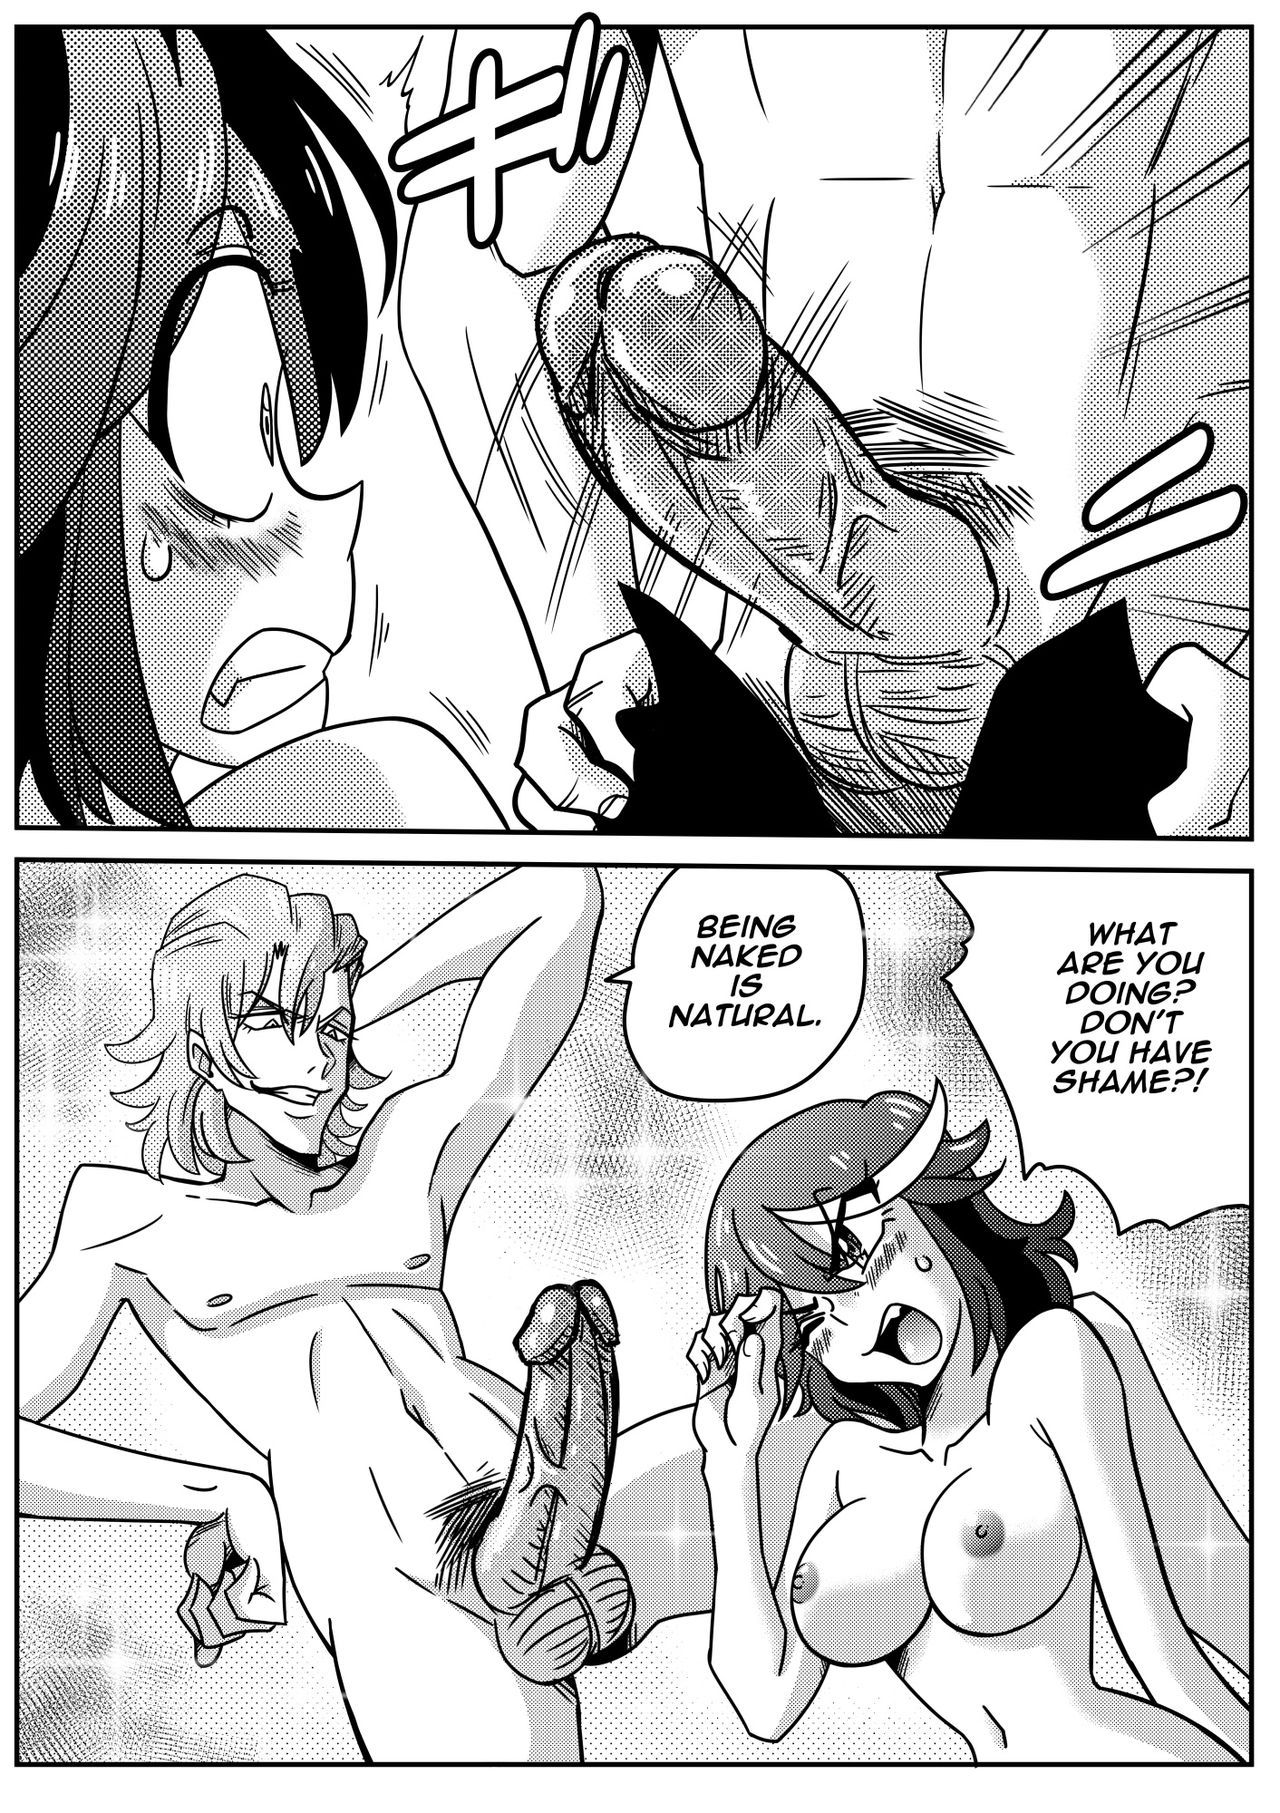 Yamamoto Doujinshi Uncensored Page and Sketch Collection 10